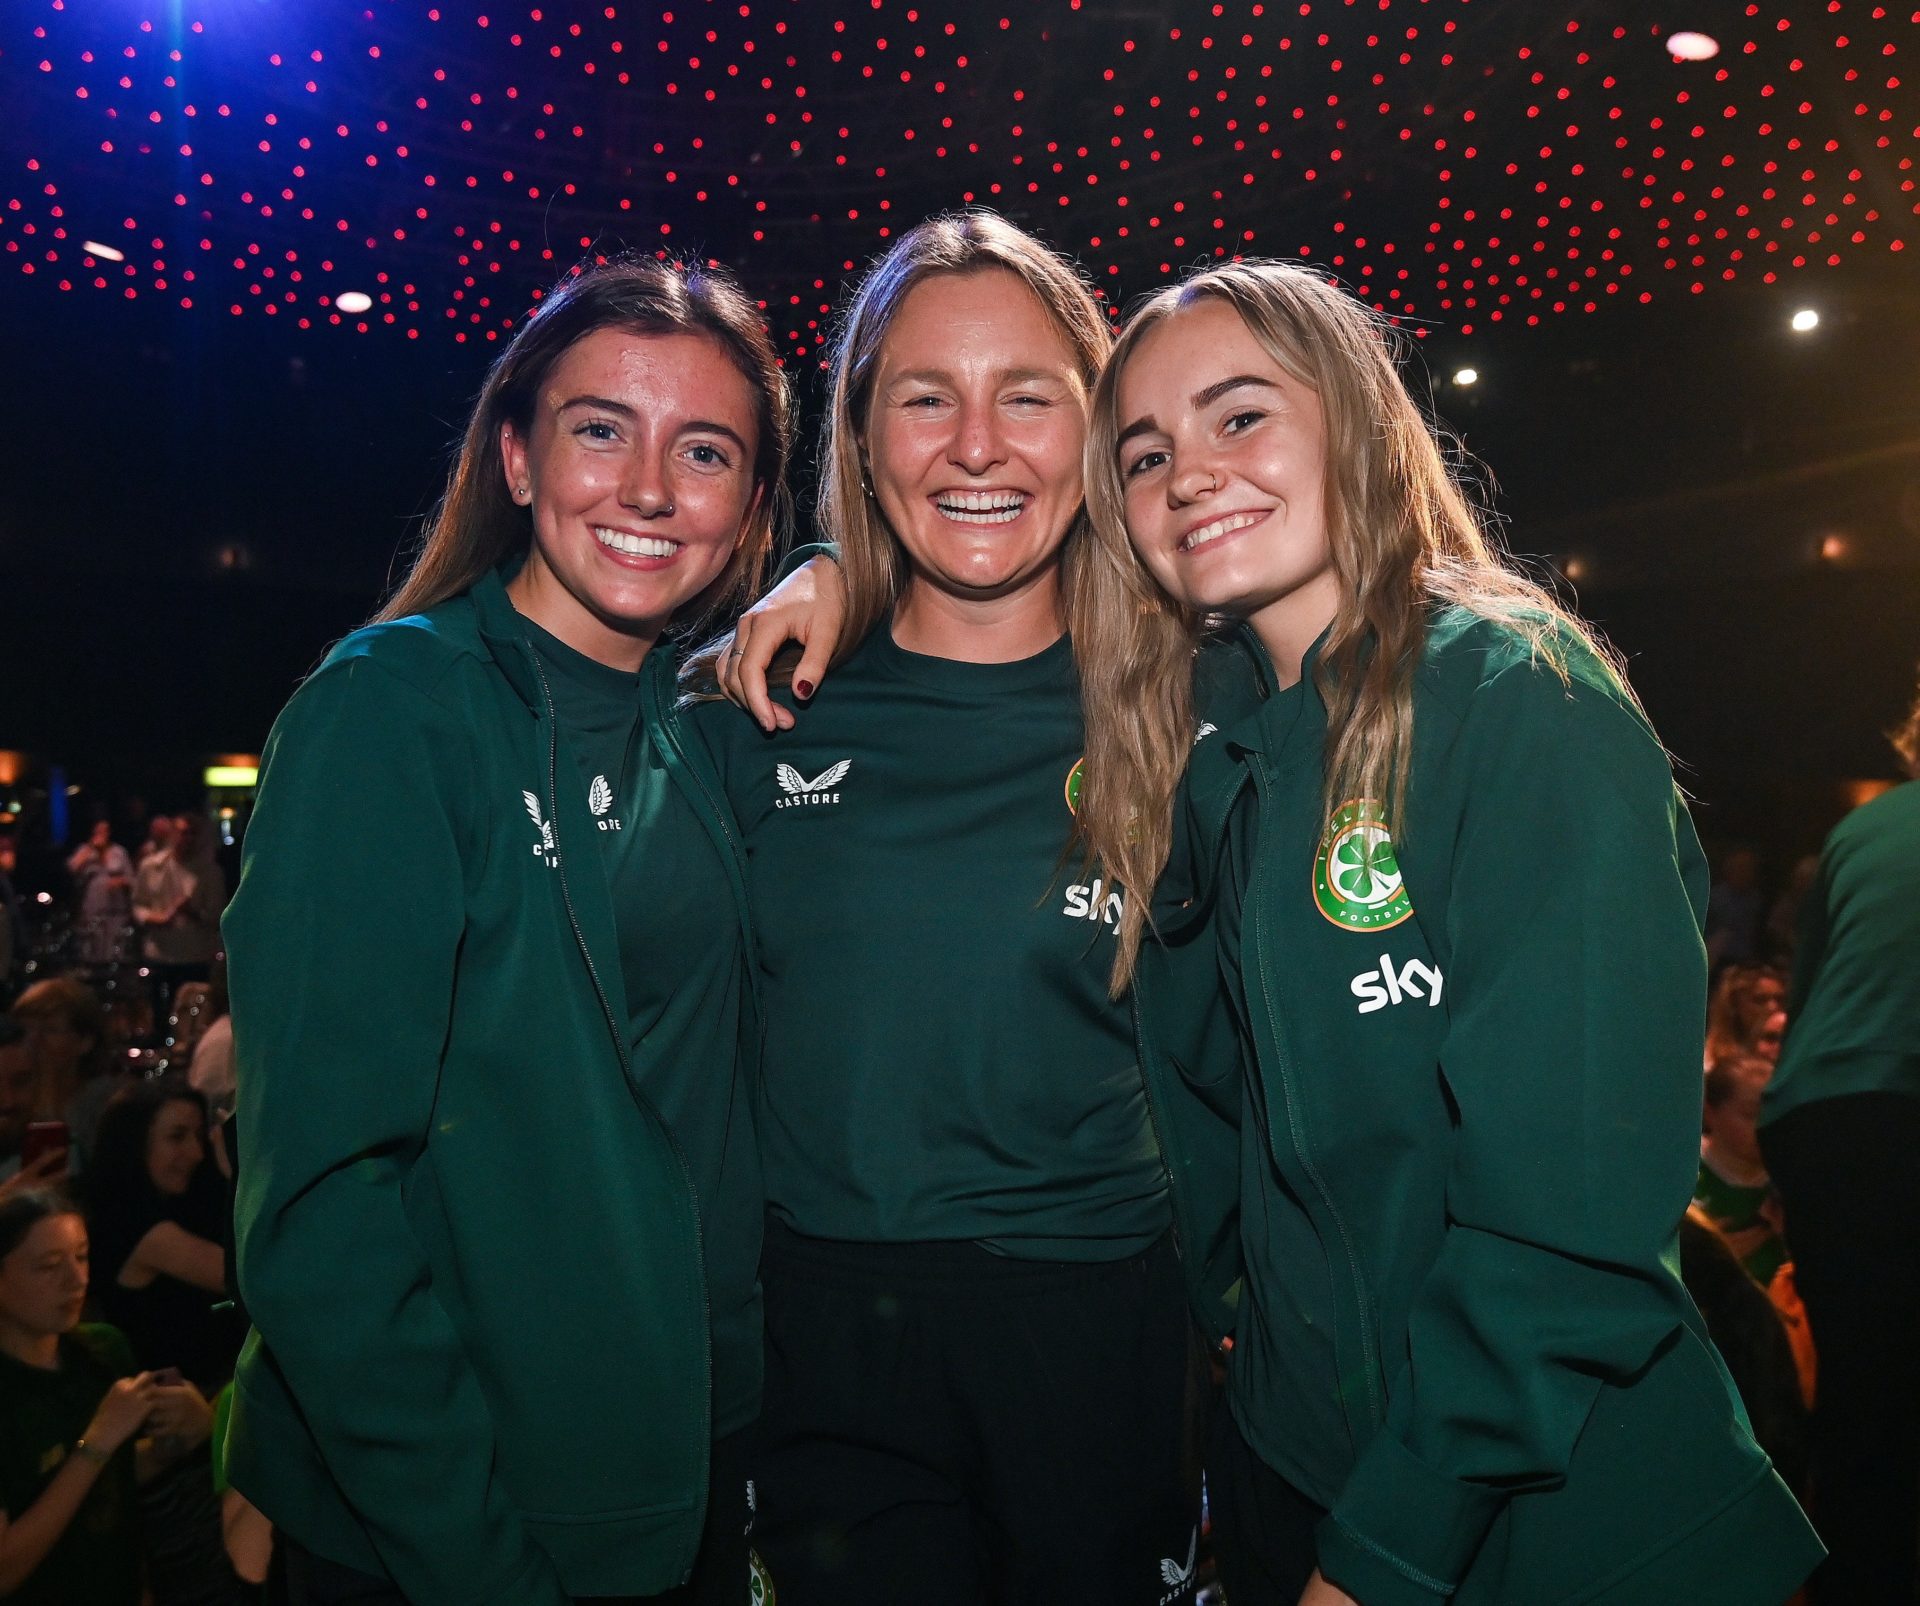 Republic of Ireland players (from left) Abbie Larkin, Kyra Carusa and Izzy Atkinson.